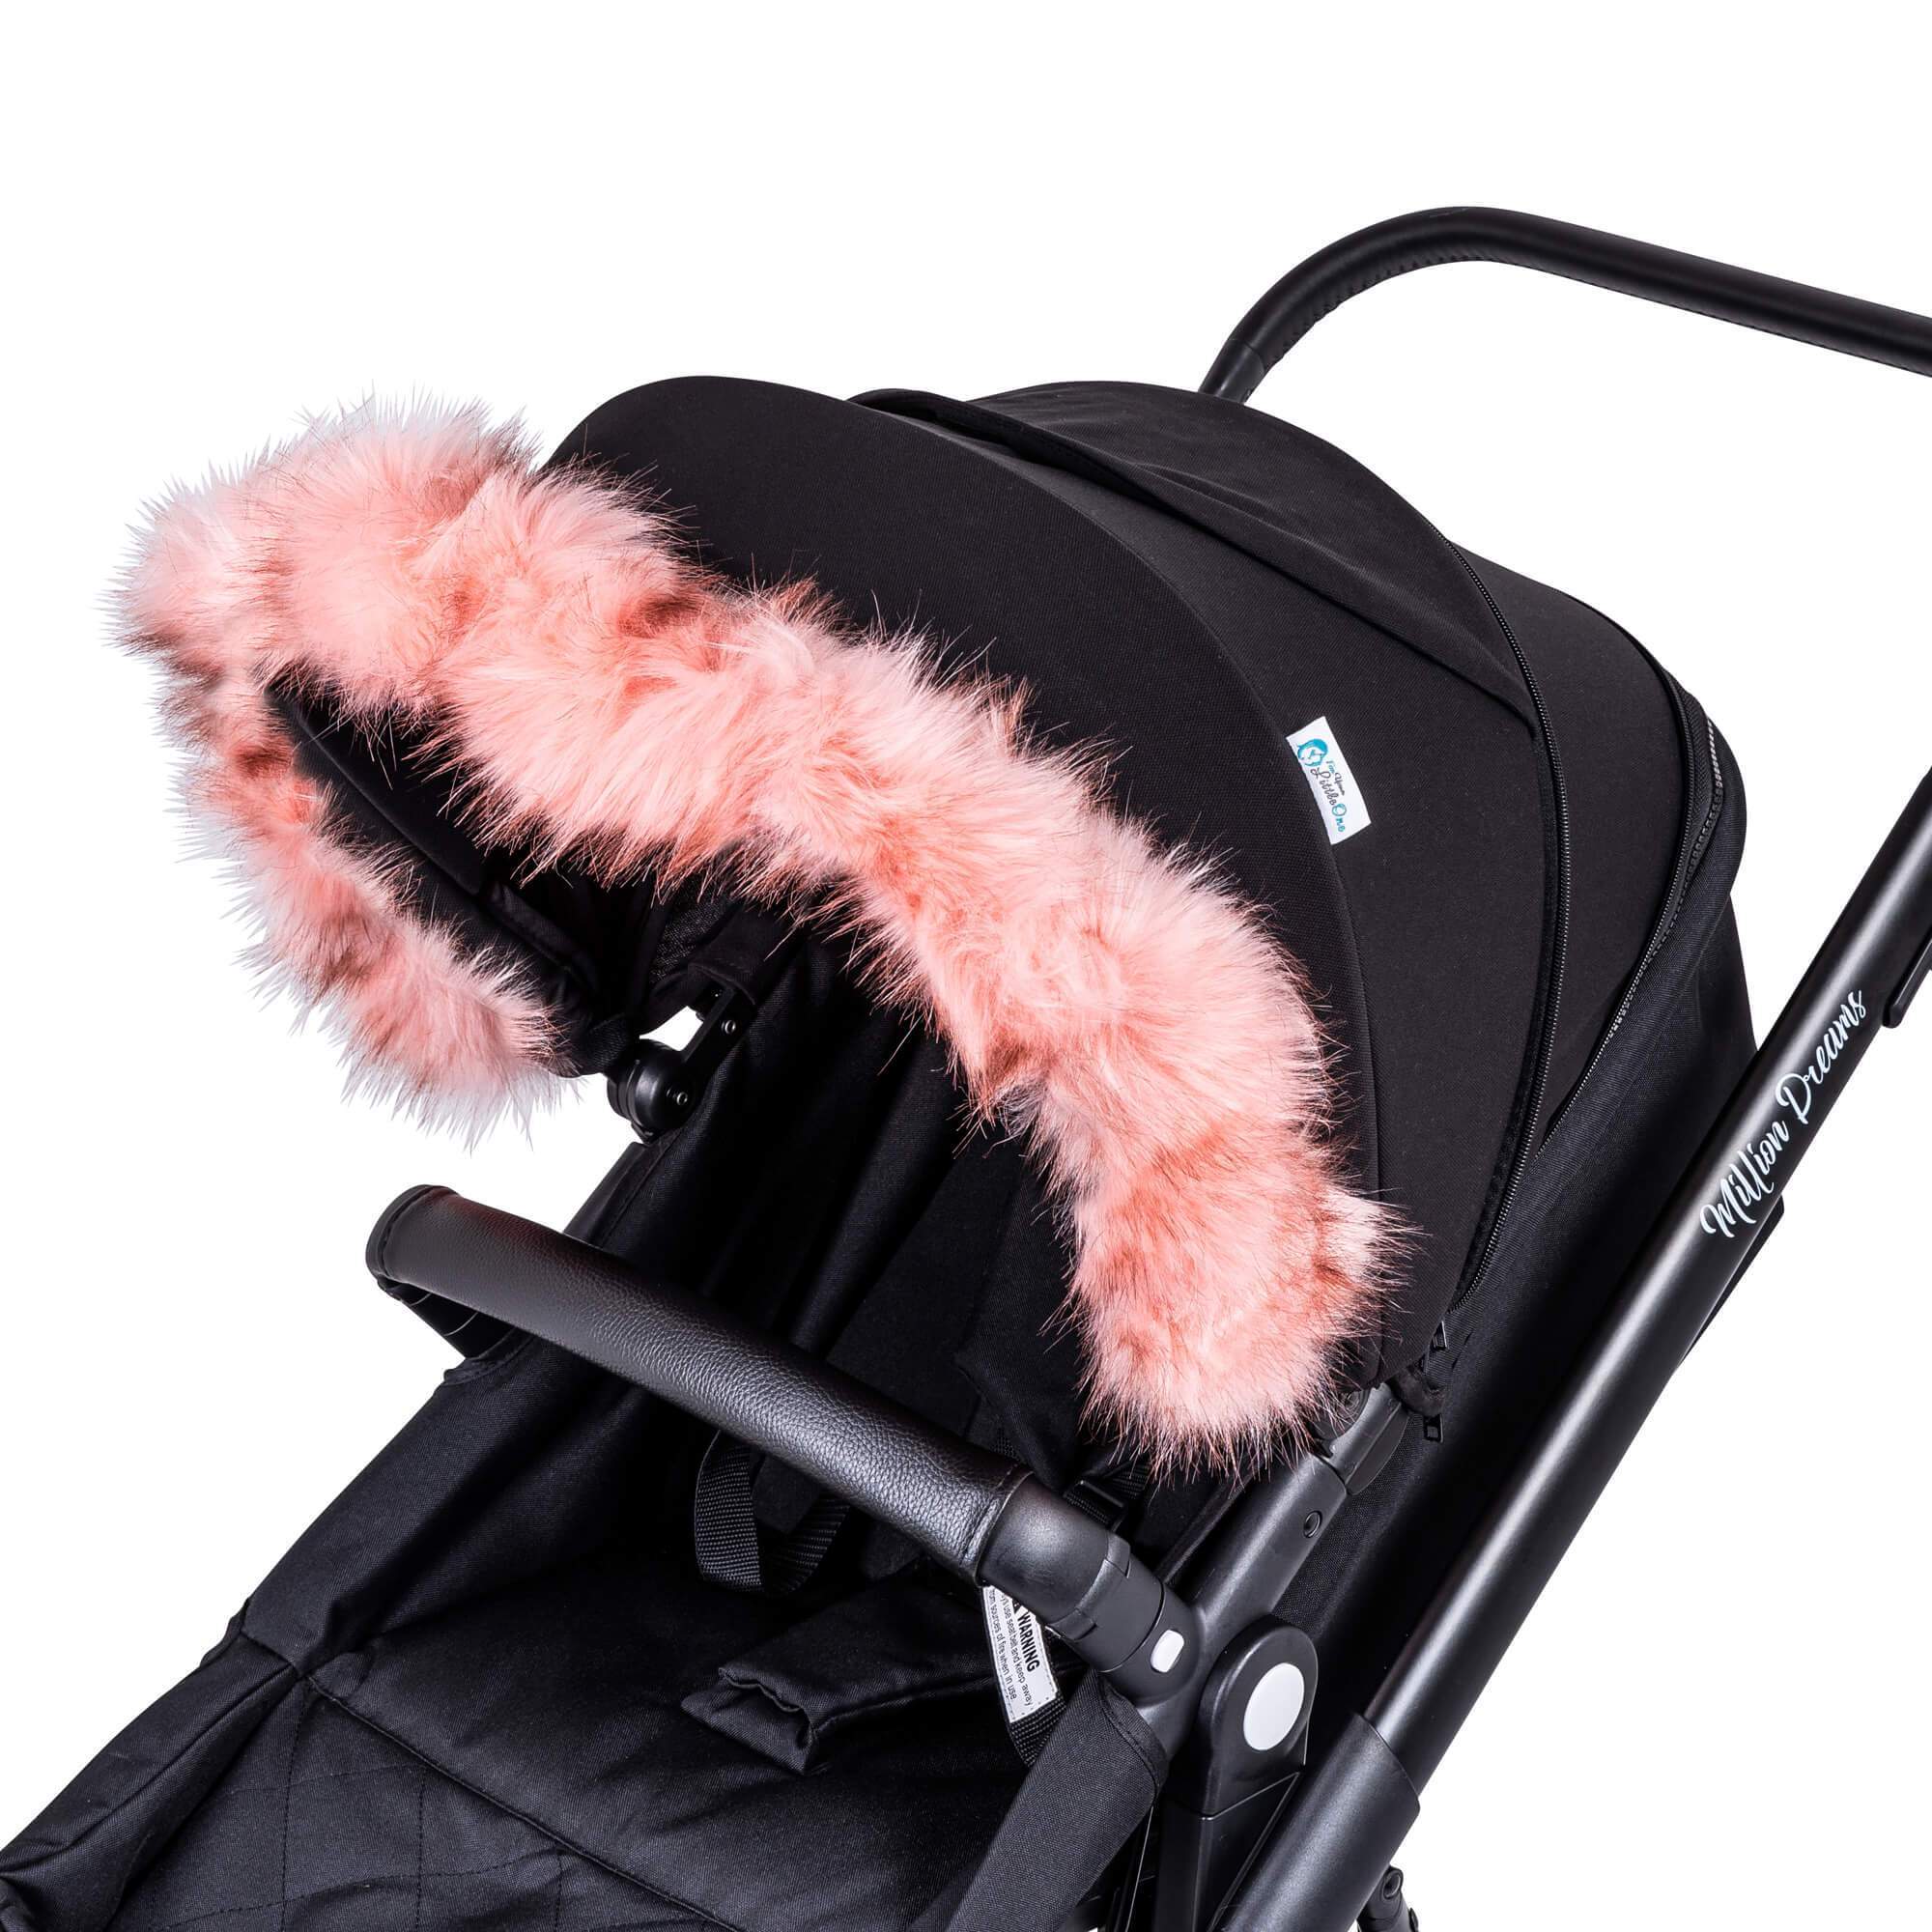 Pram Fur Hood Trim Attachment for Pushchair Compatible with Emmaljunga - For Your Little One